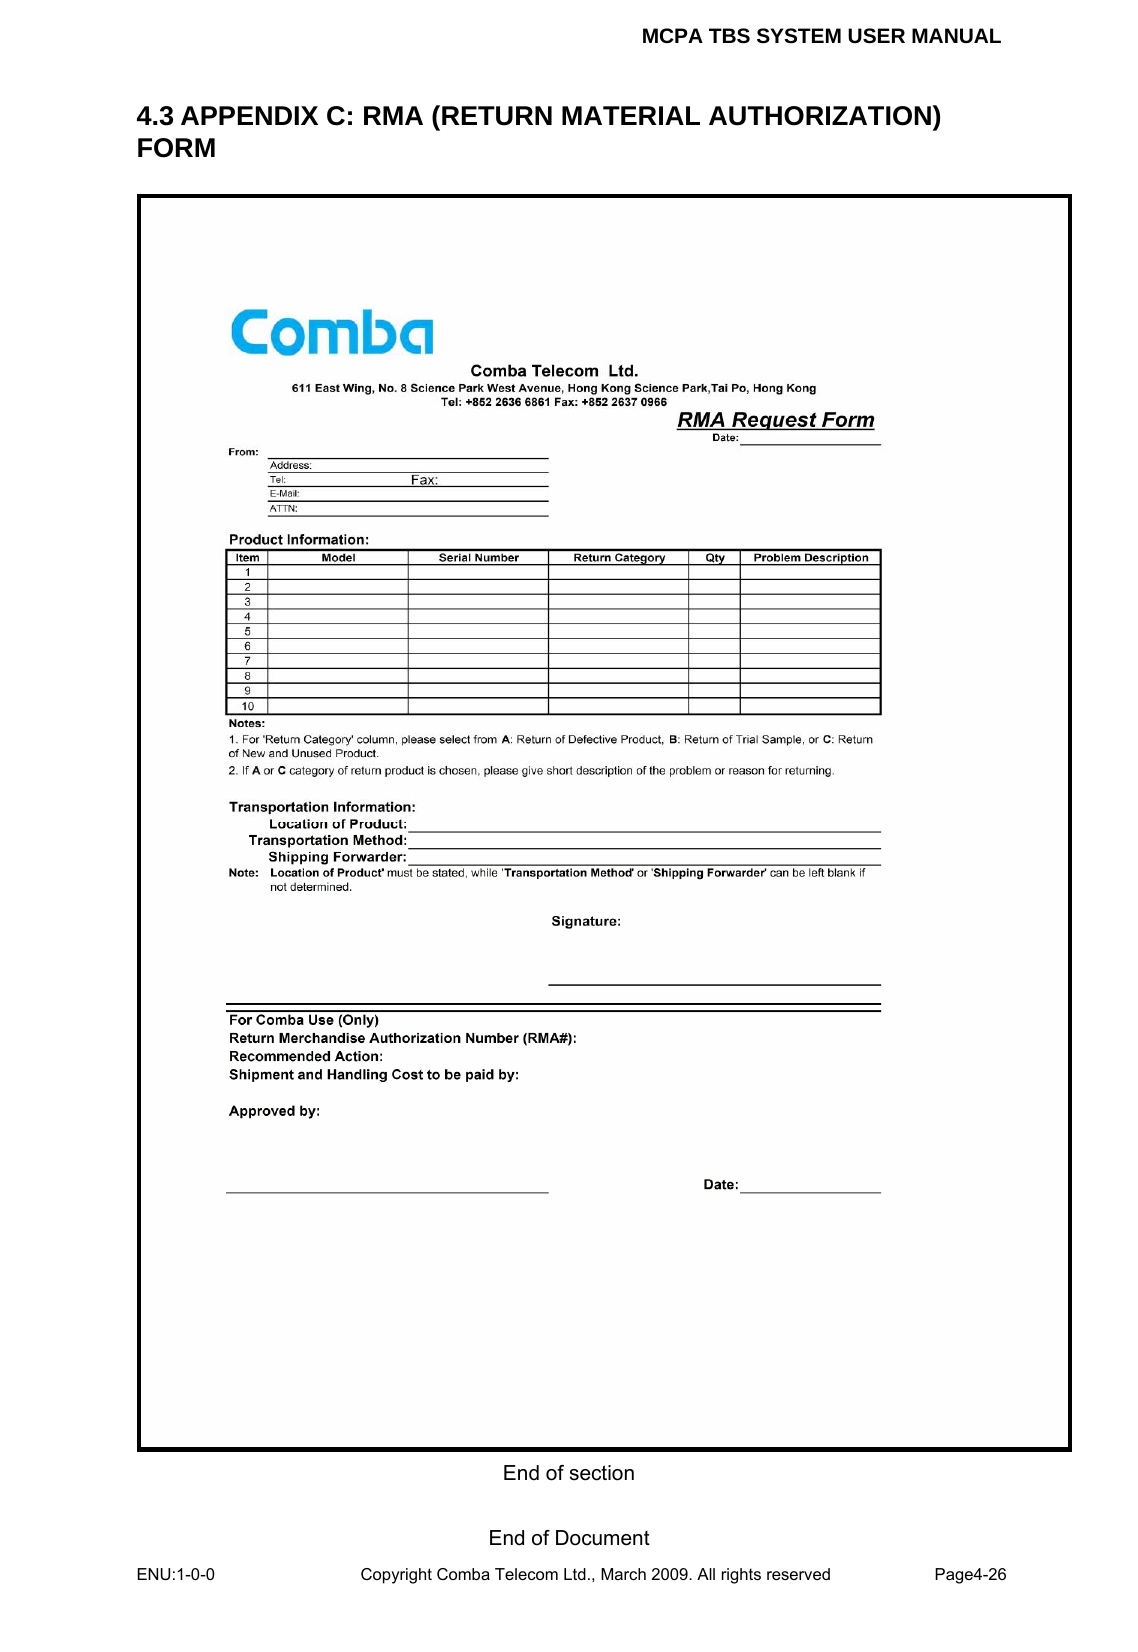 MCPA TBS SYSTEM USER MANUAL ENU:1-0-0 Copyright Comba Telecom Ltd., March 2009. All rights reserved  Page4-26    4.3 APPENDIX C: RMA (RETURN MATERIAL AUTHORIZATION) FORM  End of section  End of Document 